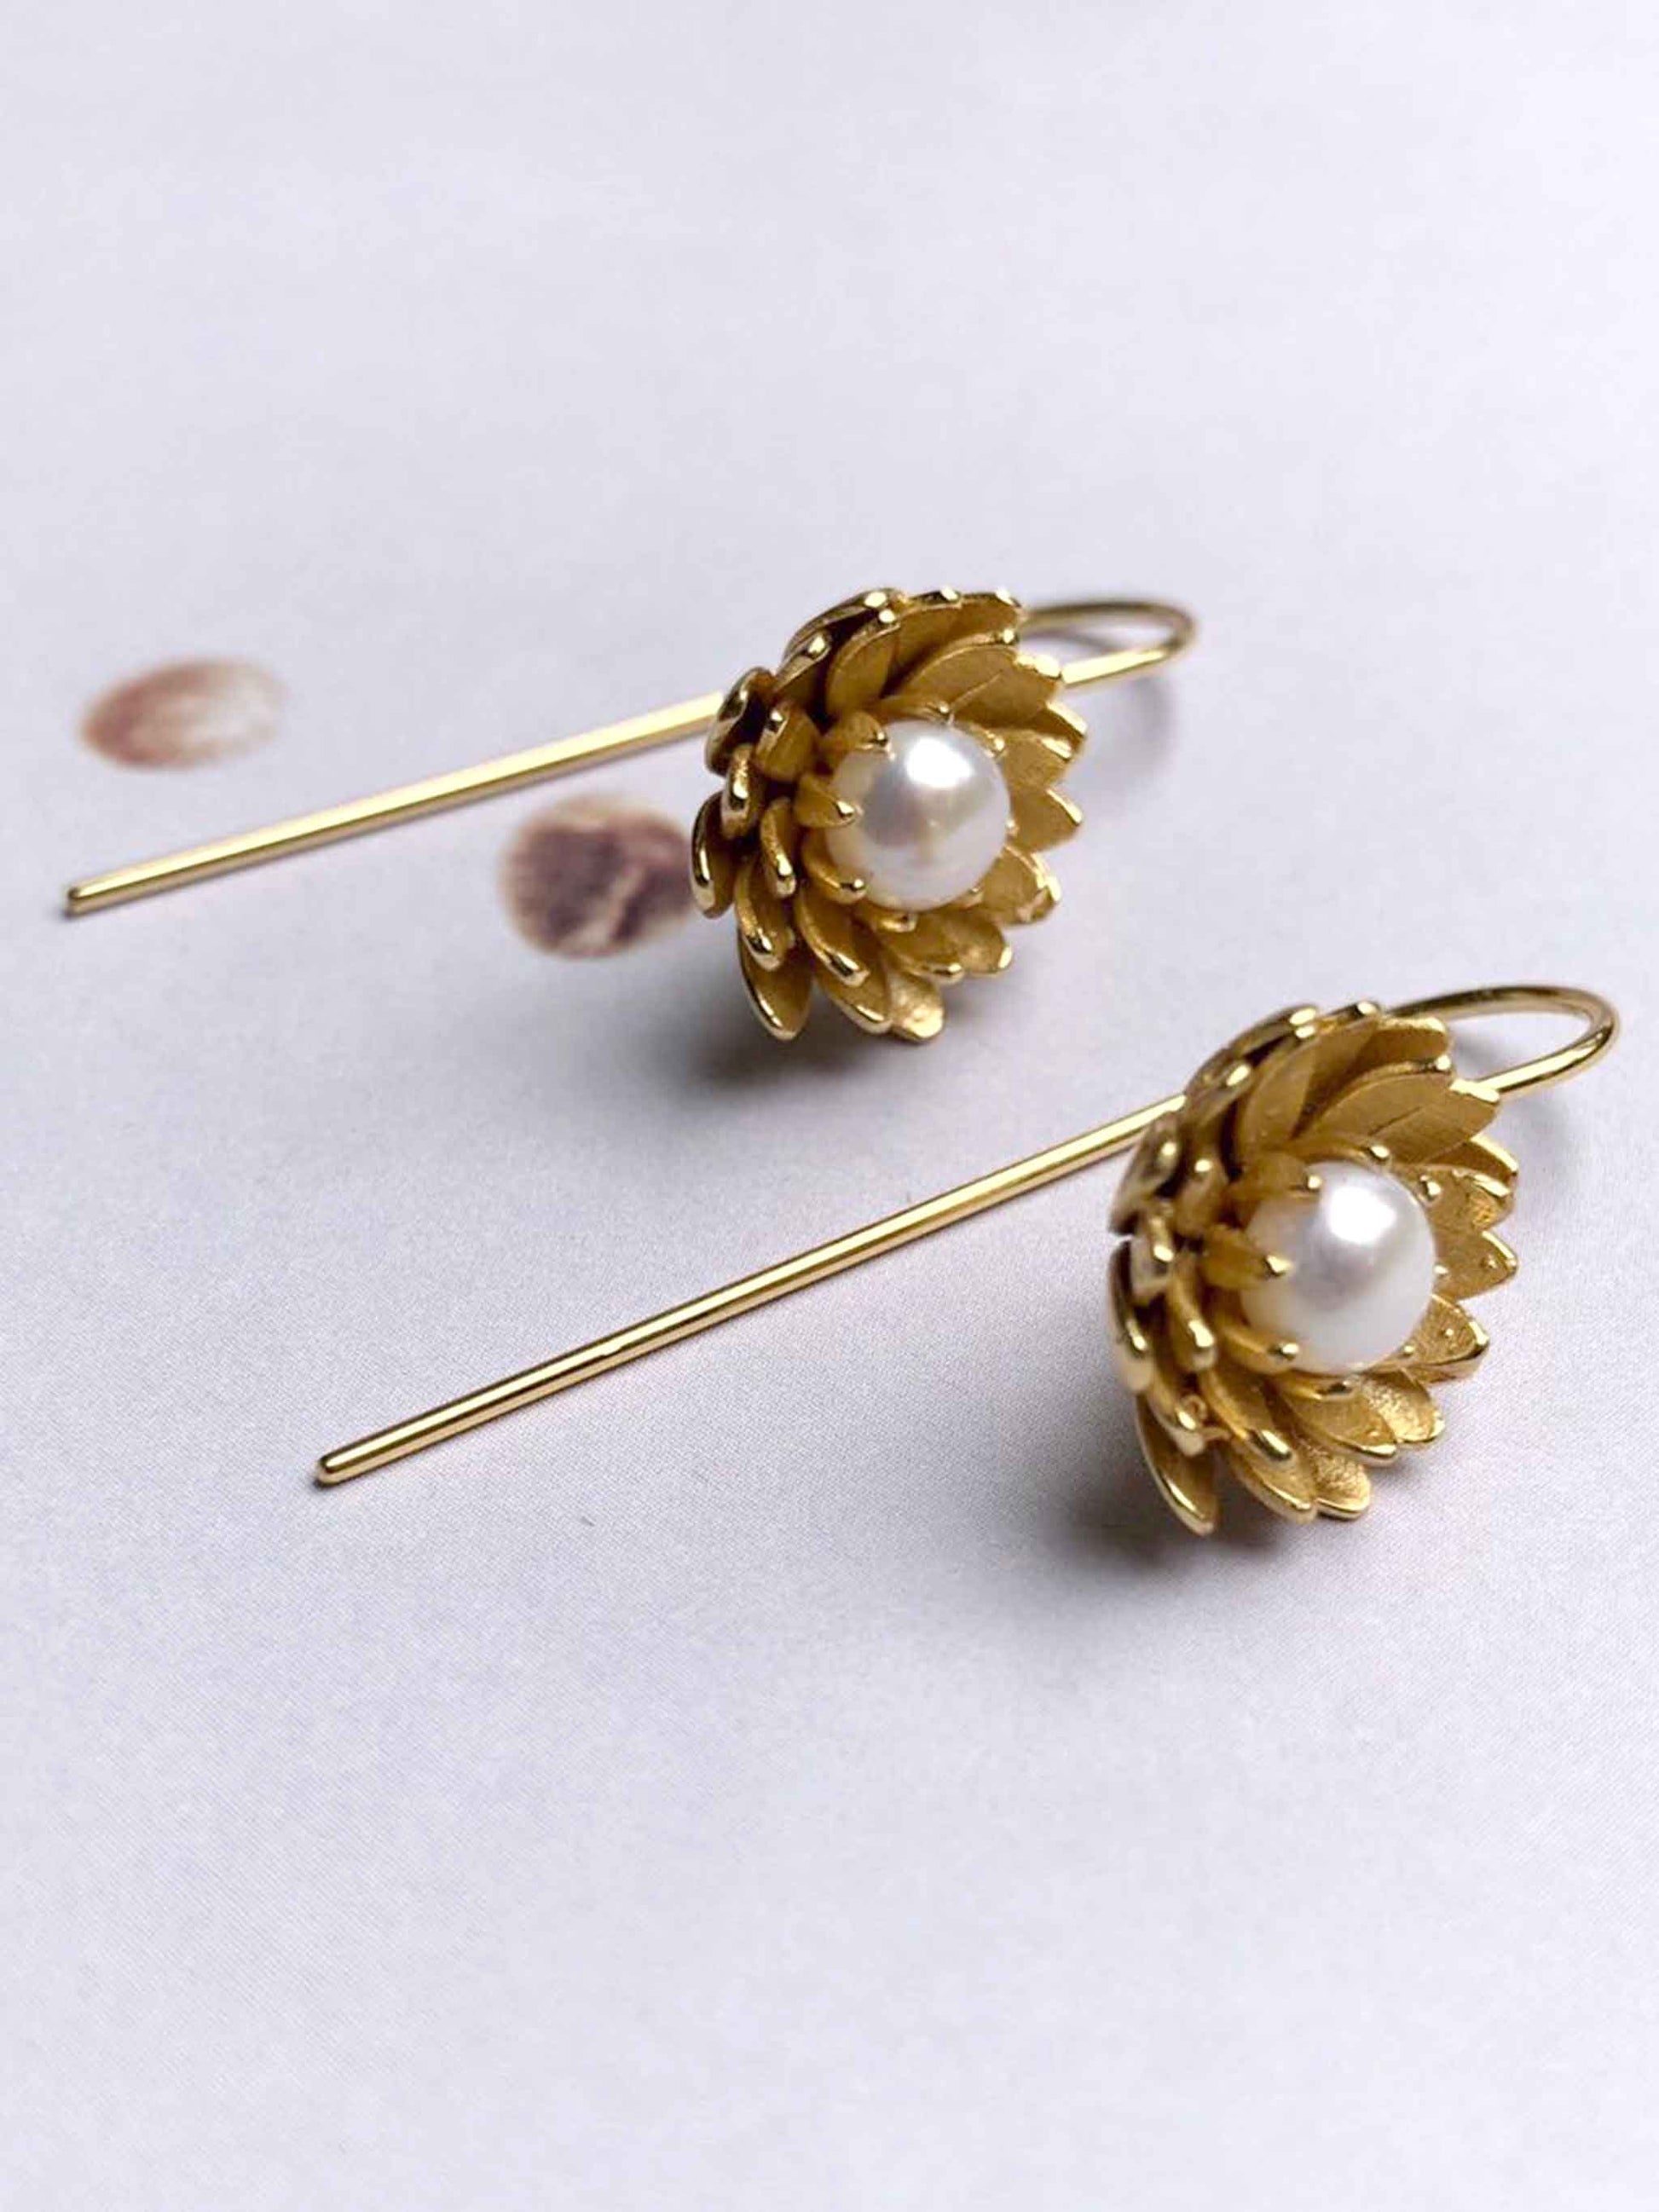 Lotus 18k Gold Plated Blossom Hook Earrings with Freshwater Pearls by YI SU